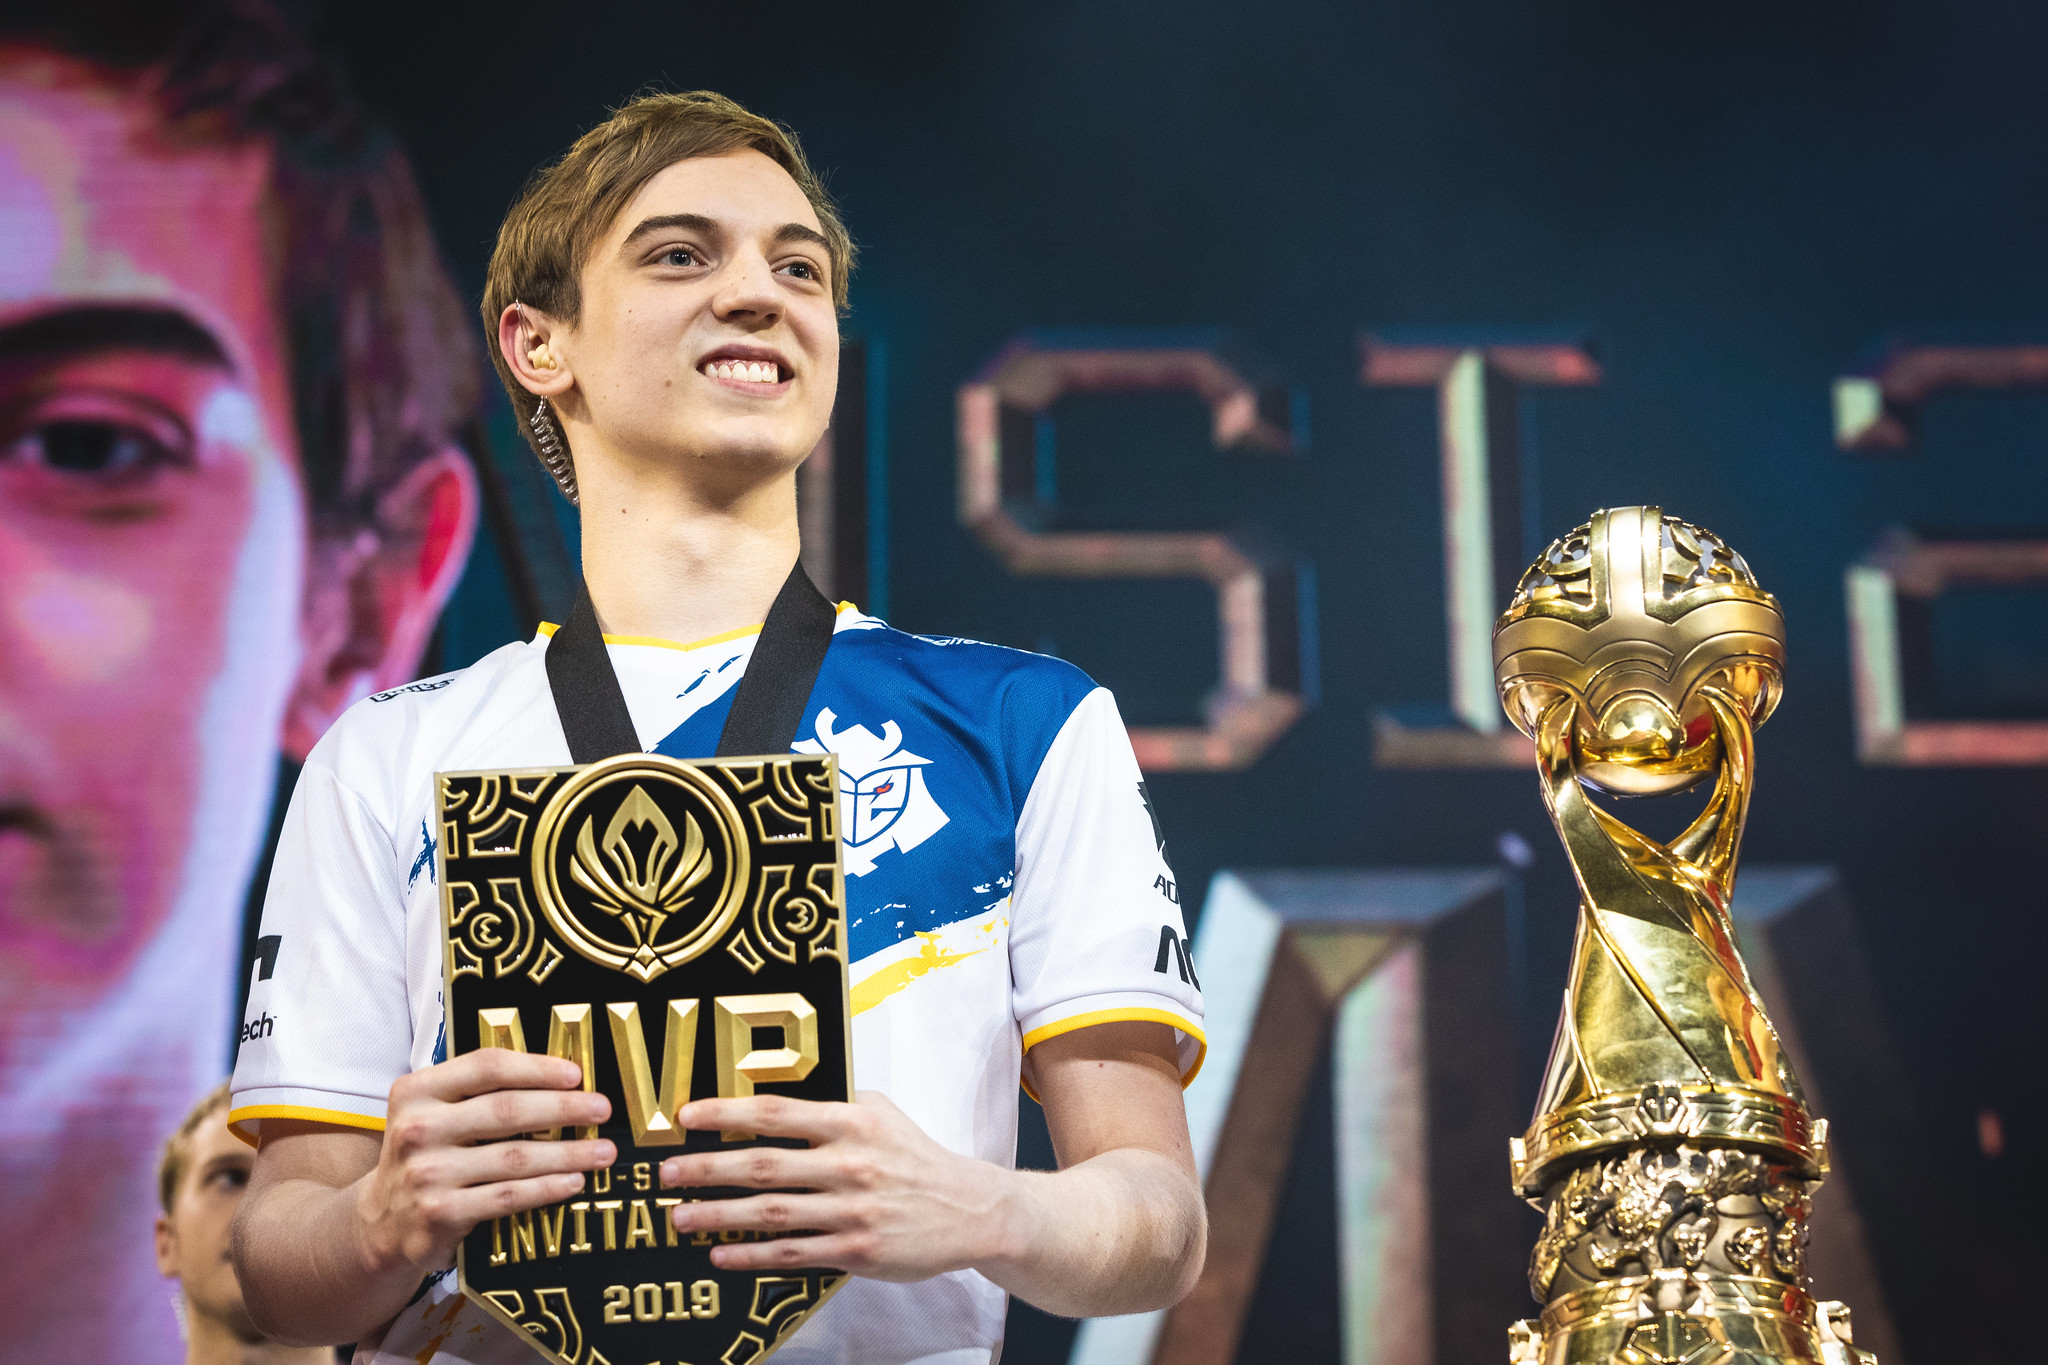 The best of Caps at MSI 2019 | Dot Esports